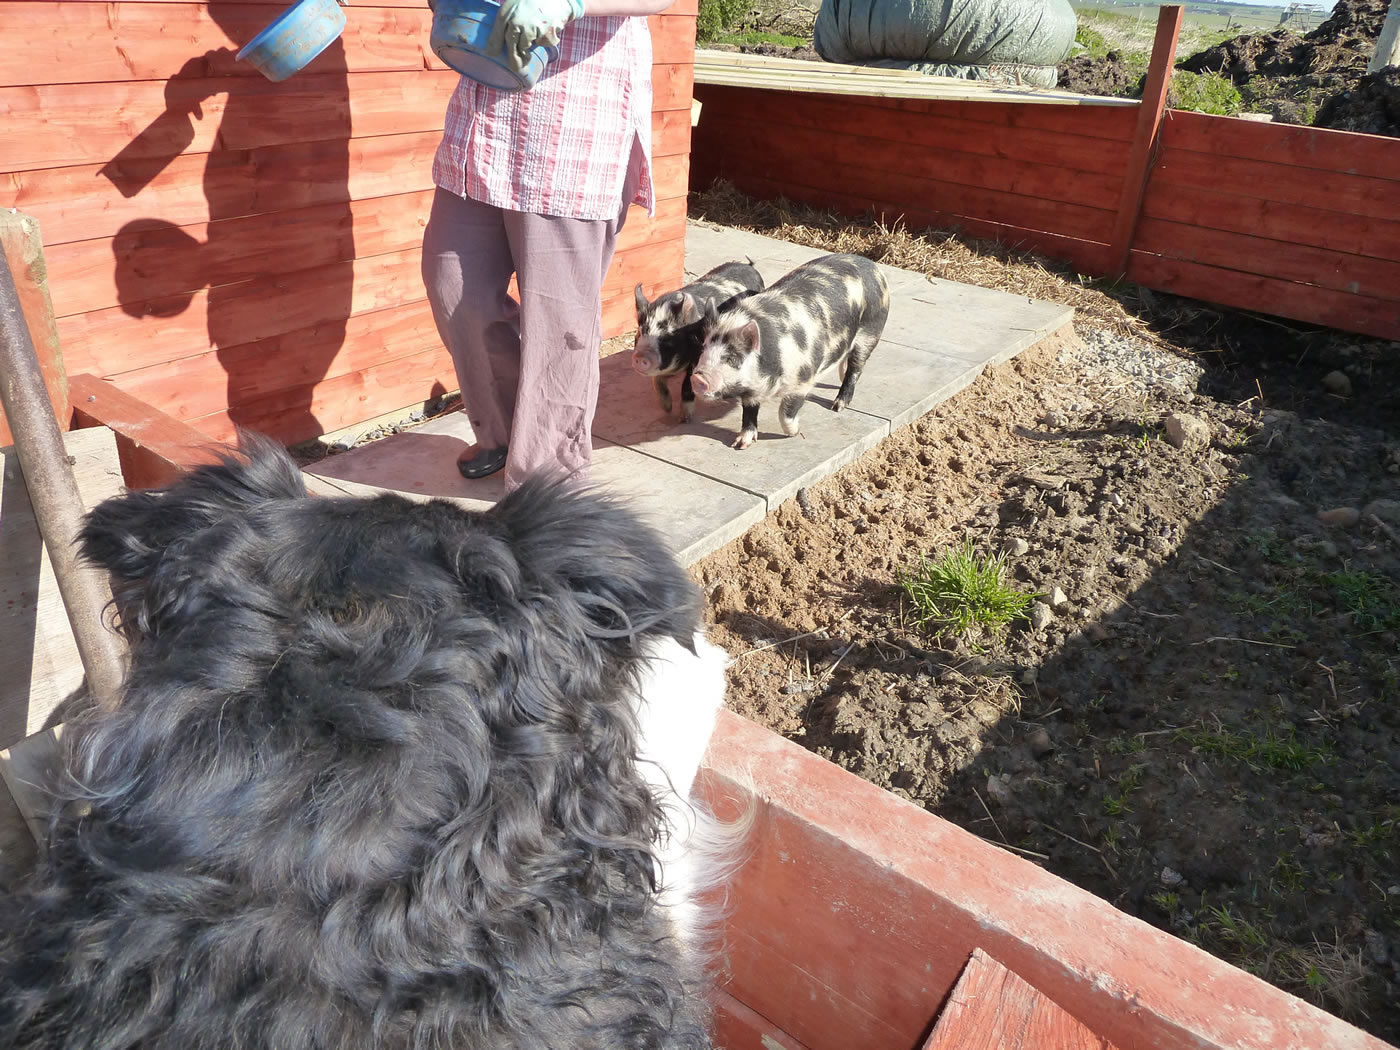 Picture of Sheepdog collie, Tibby, watching the young pet pigs